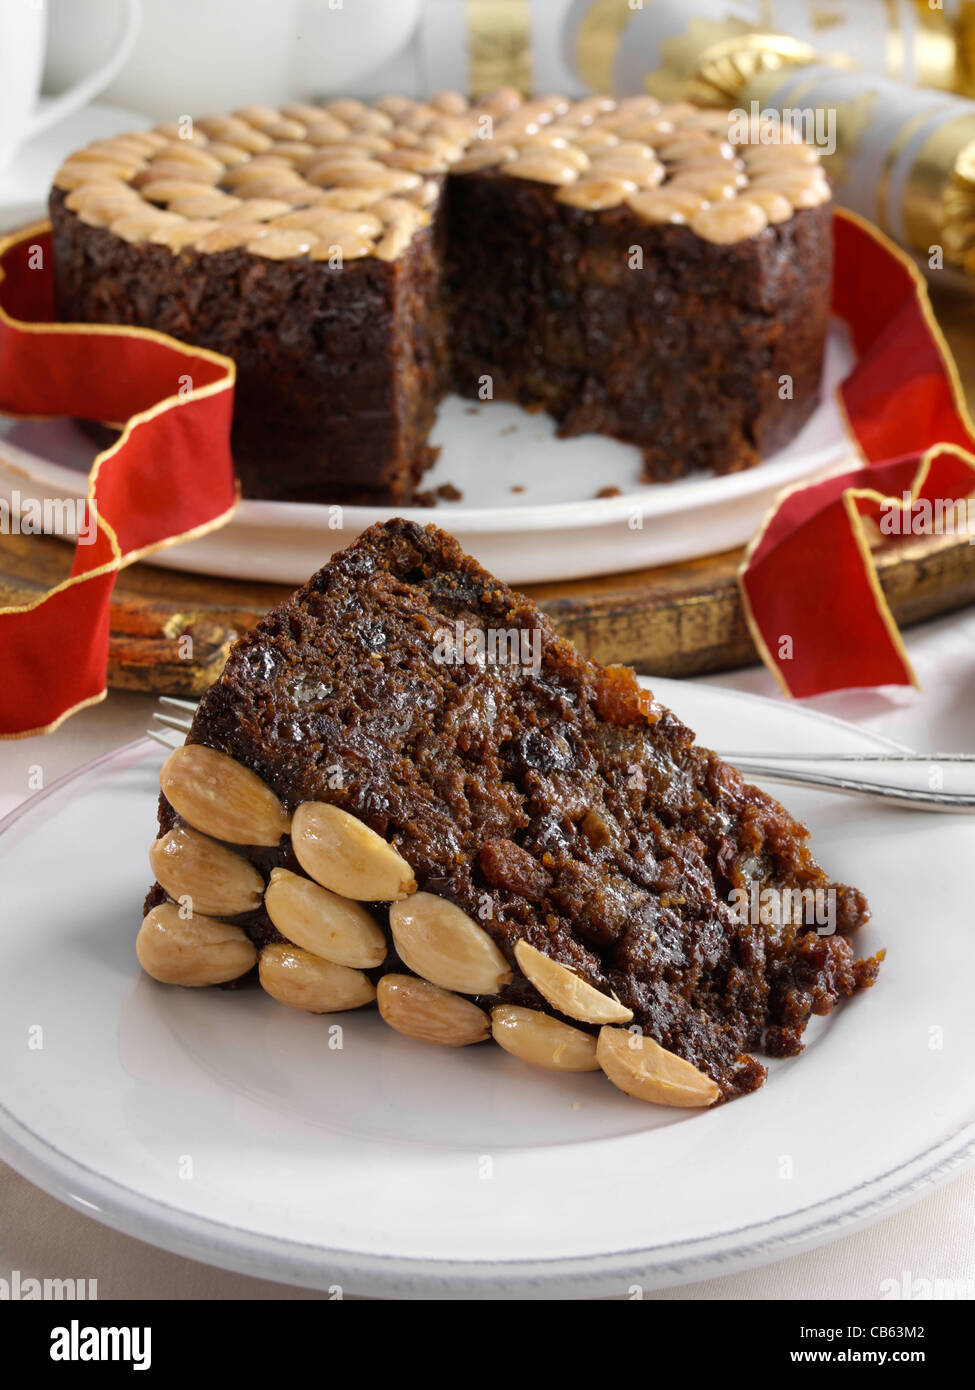 UK Christmas cake with a slice in front Stock Photo